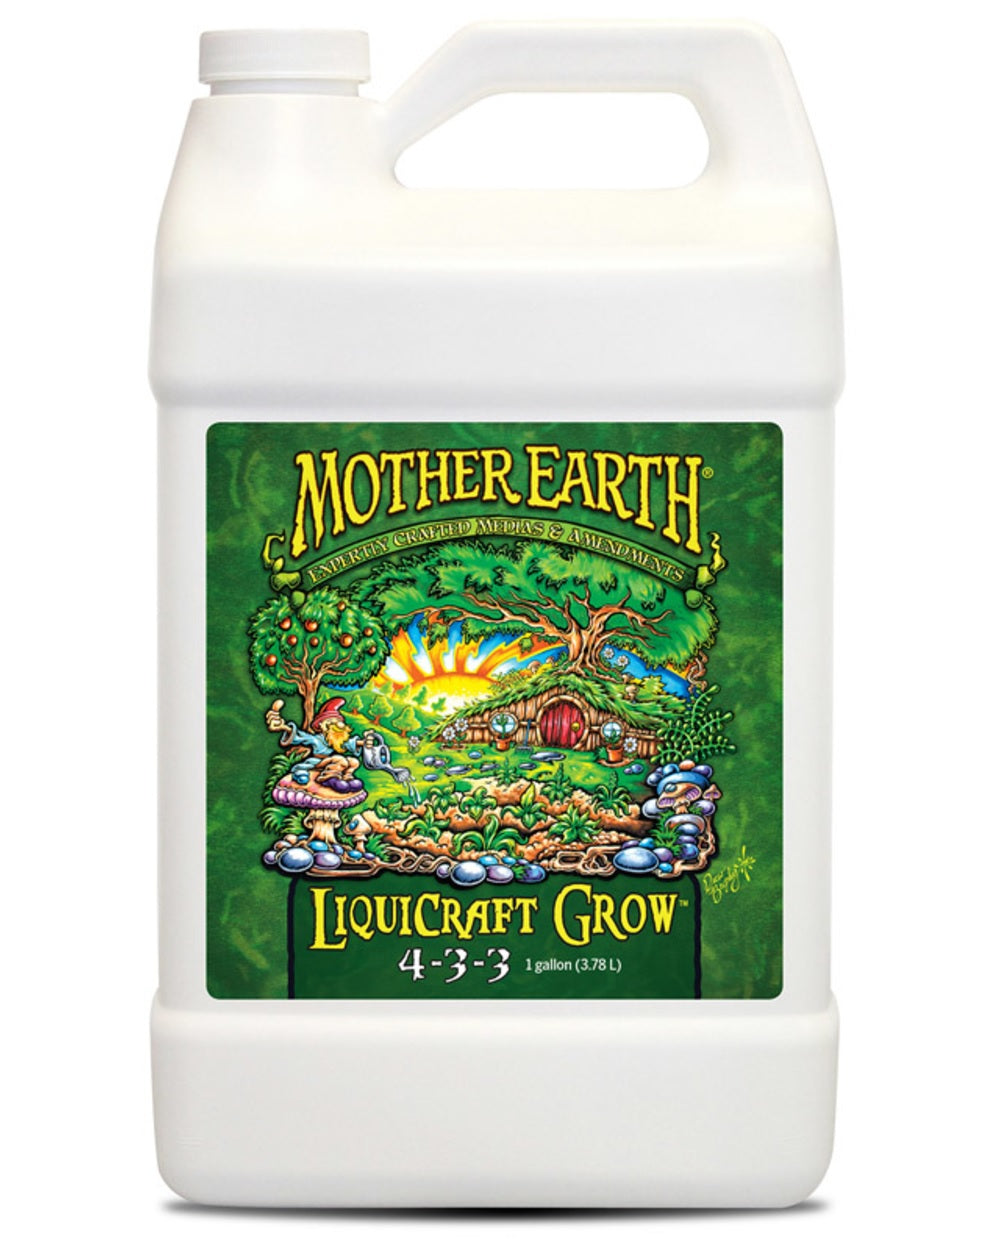 Mother Earth HGC733933 Liquicraft Grow Hydroponic Plant Nutrients, 1 Gallon